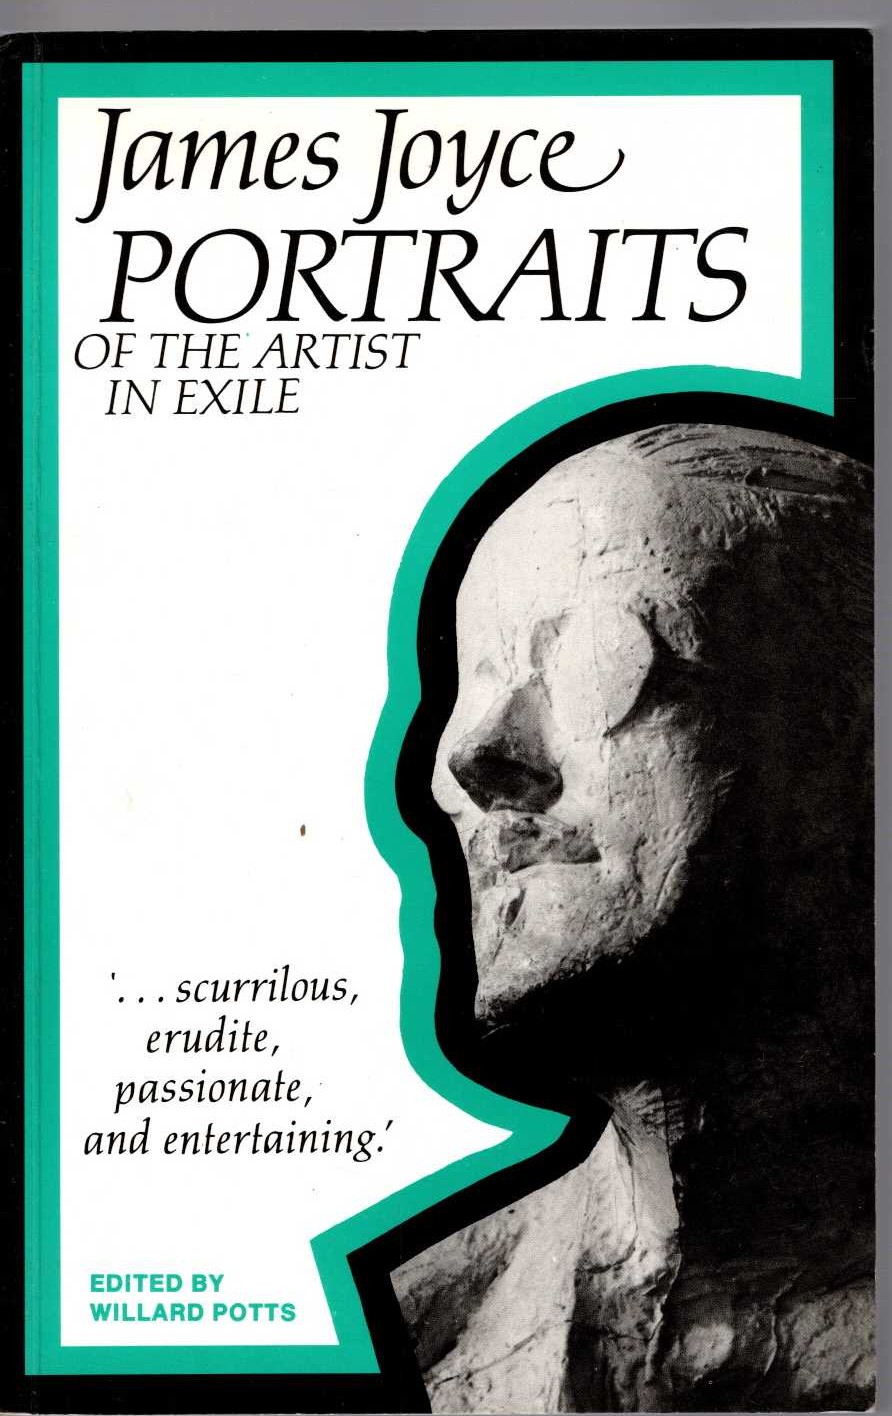 (Willard Potts edits) JAMES JOYCE. PORTRAITS OF THE ARTIST IN EXILE. Recollections of James Joyce by Europeans front book cover image